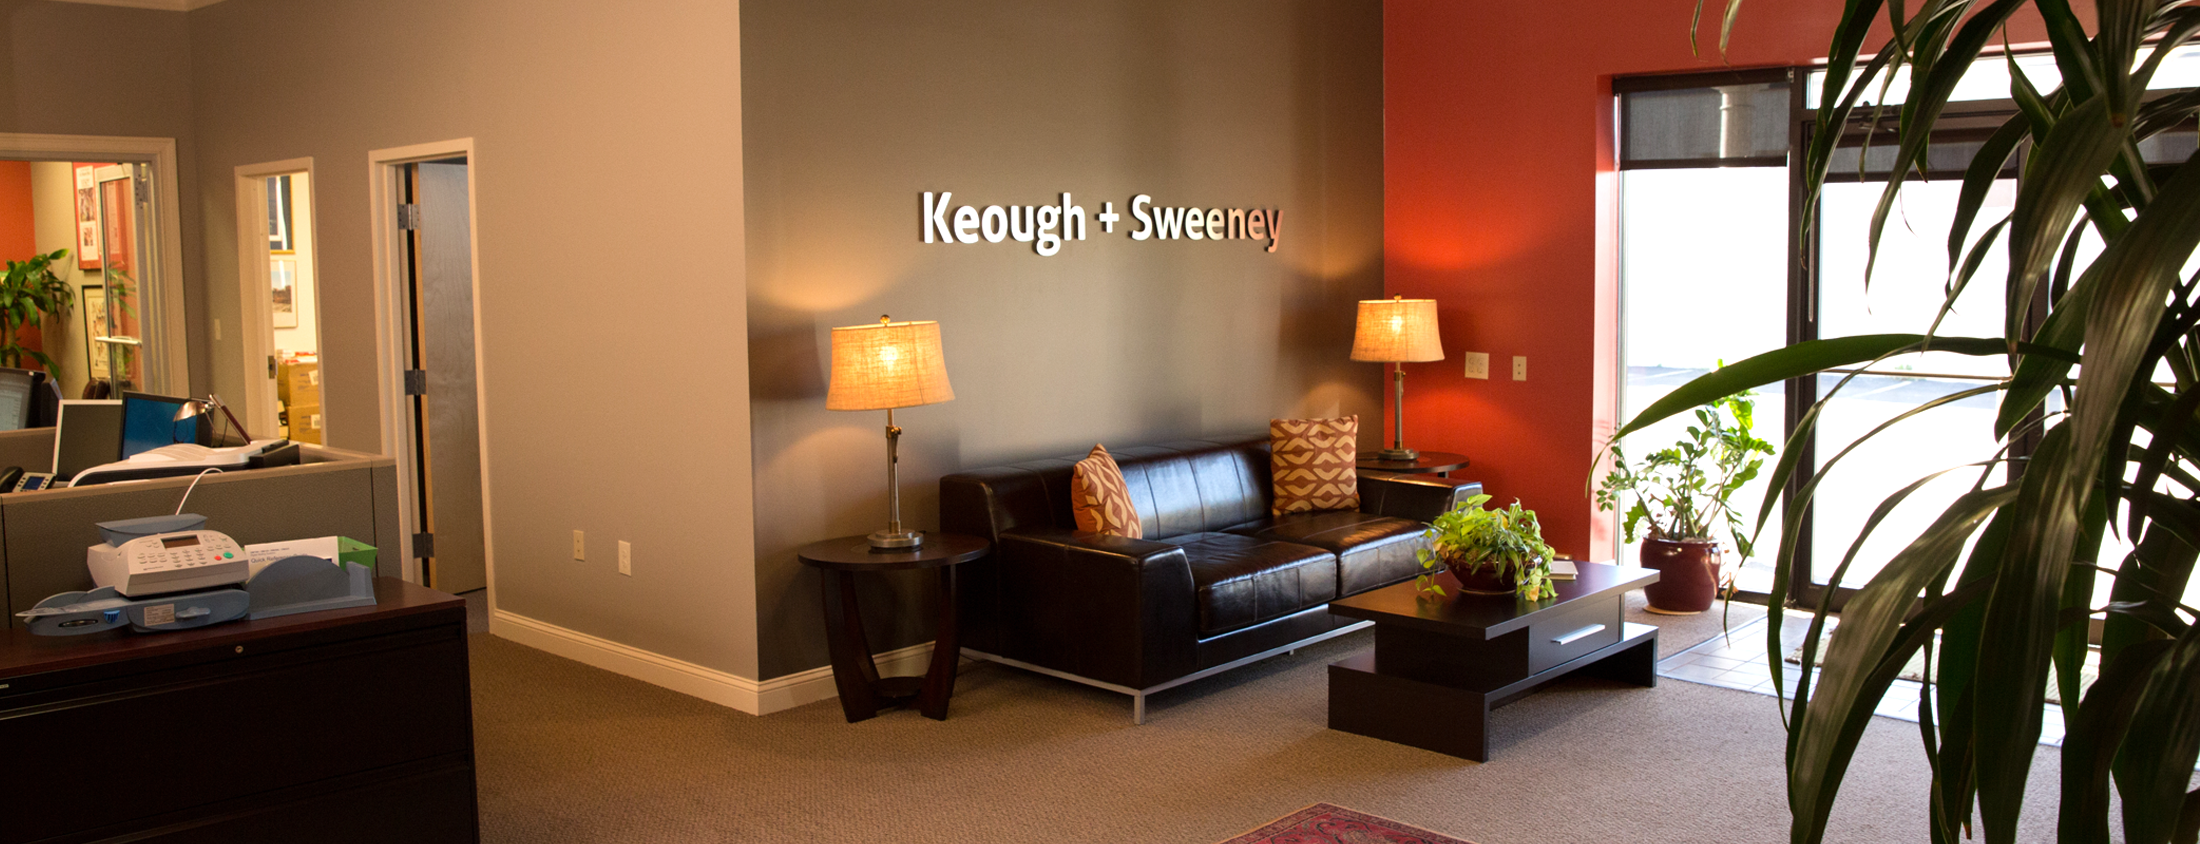 Keough + Sweeney, divorce, business, personal injury, utility and criminal lawyers in RI and MA.